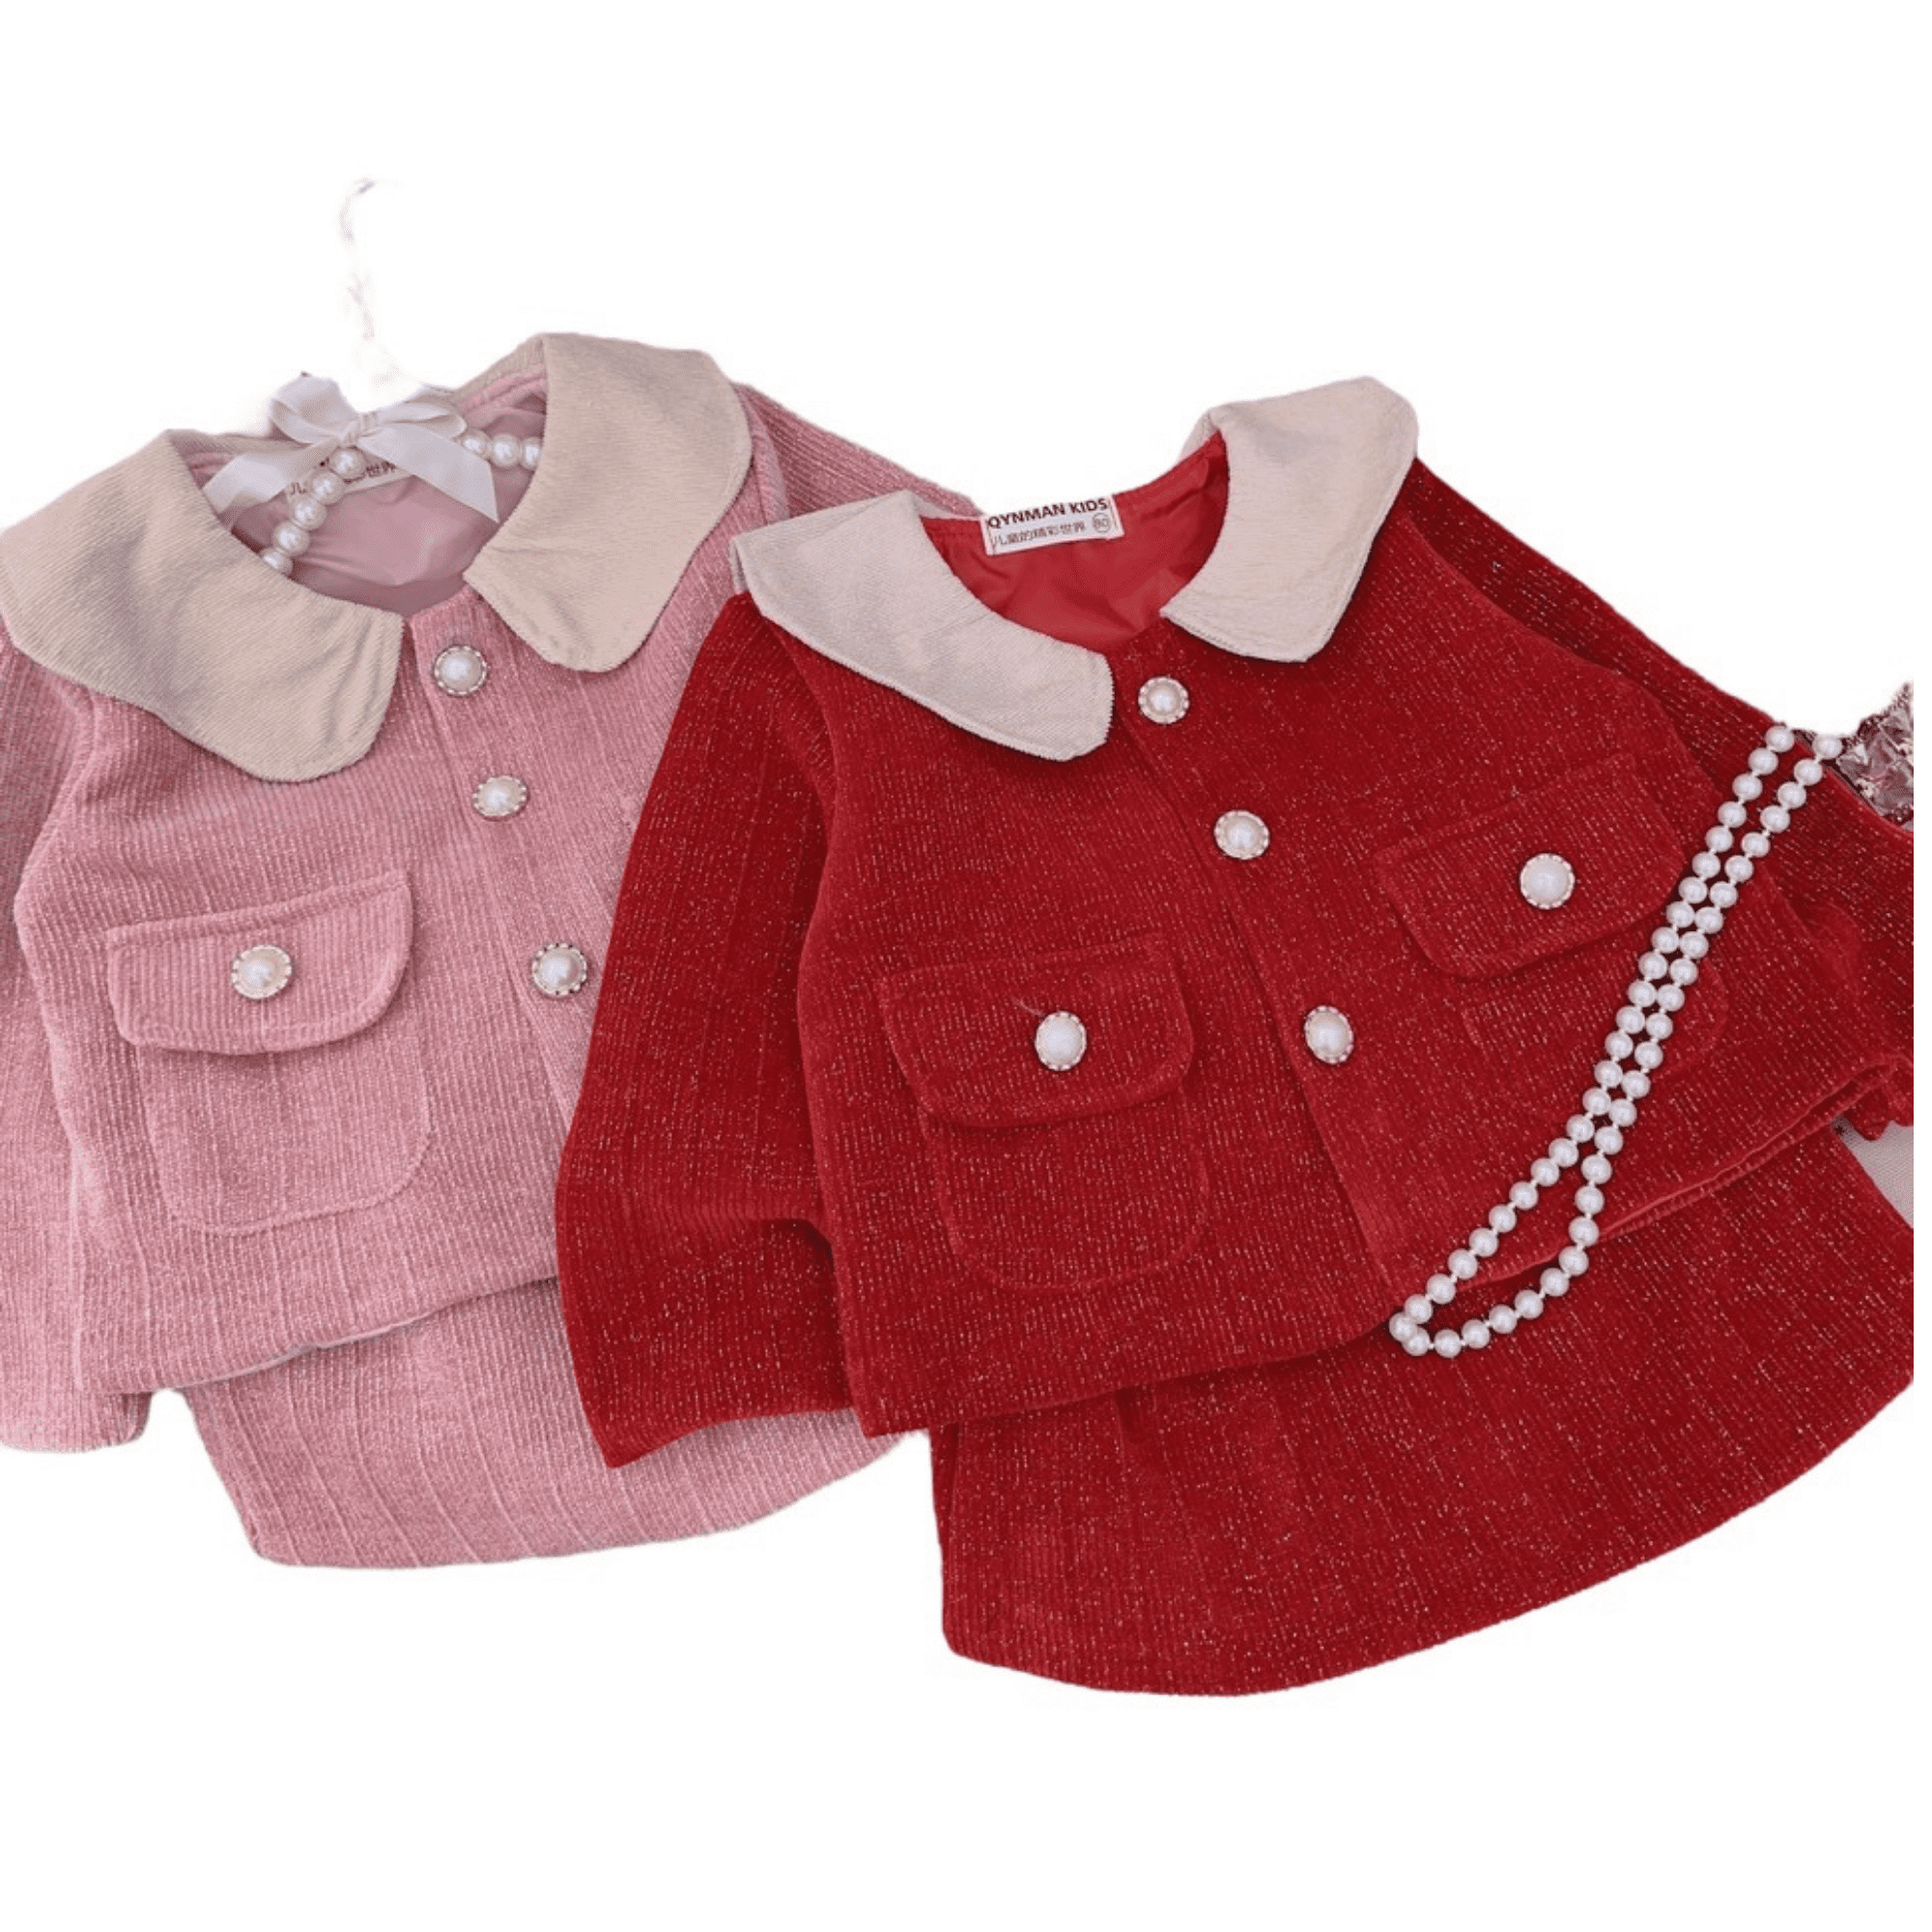 Winter Clothes For Kids High Quality Natural Dresses Casual Each One In Opp Bag From Vietnam Manufacturer